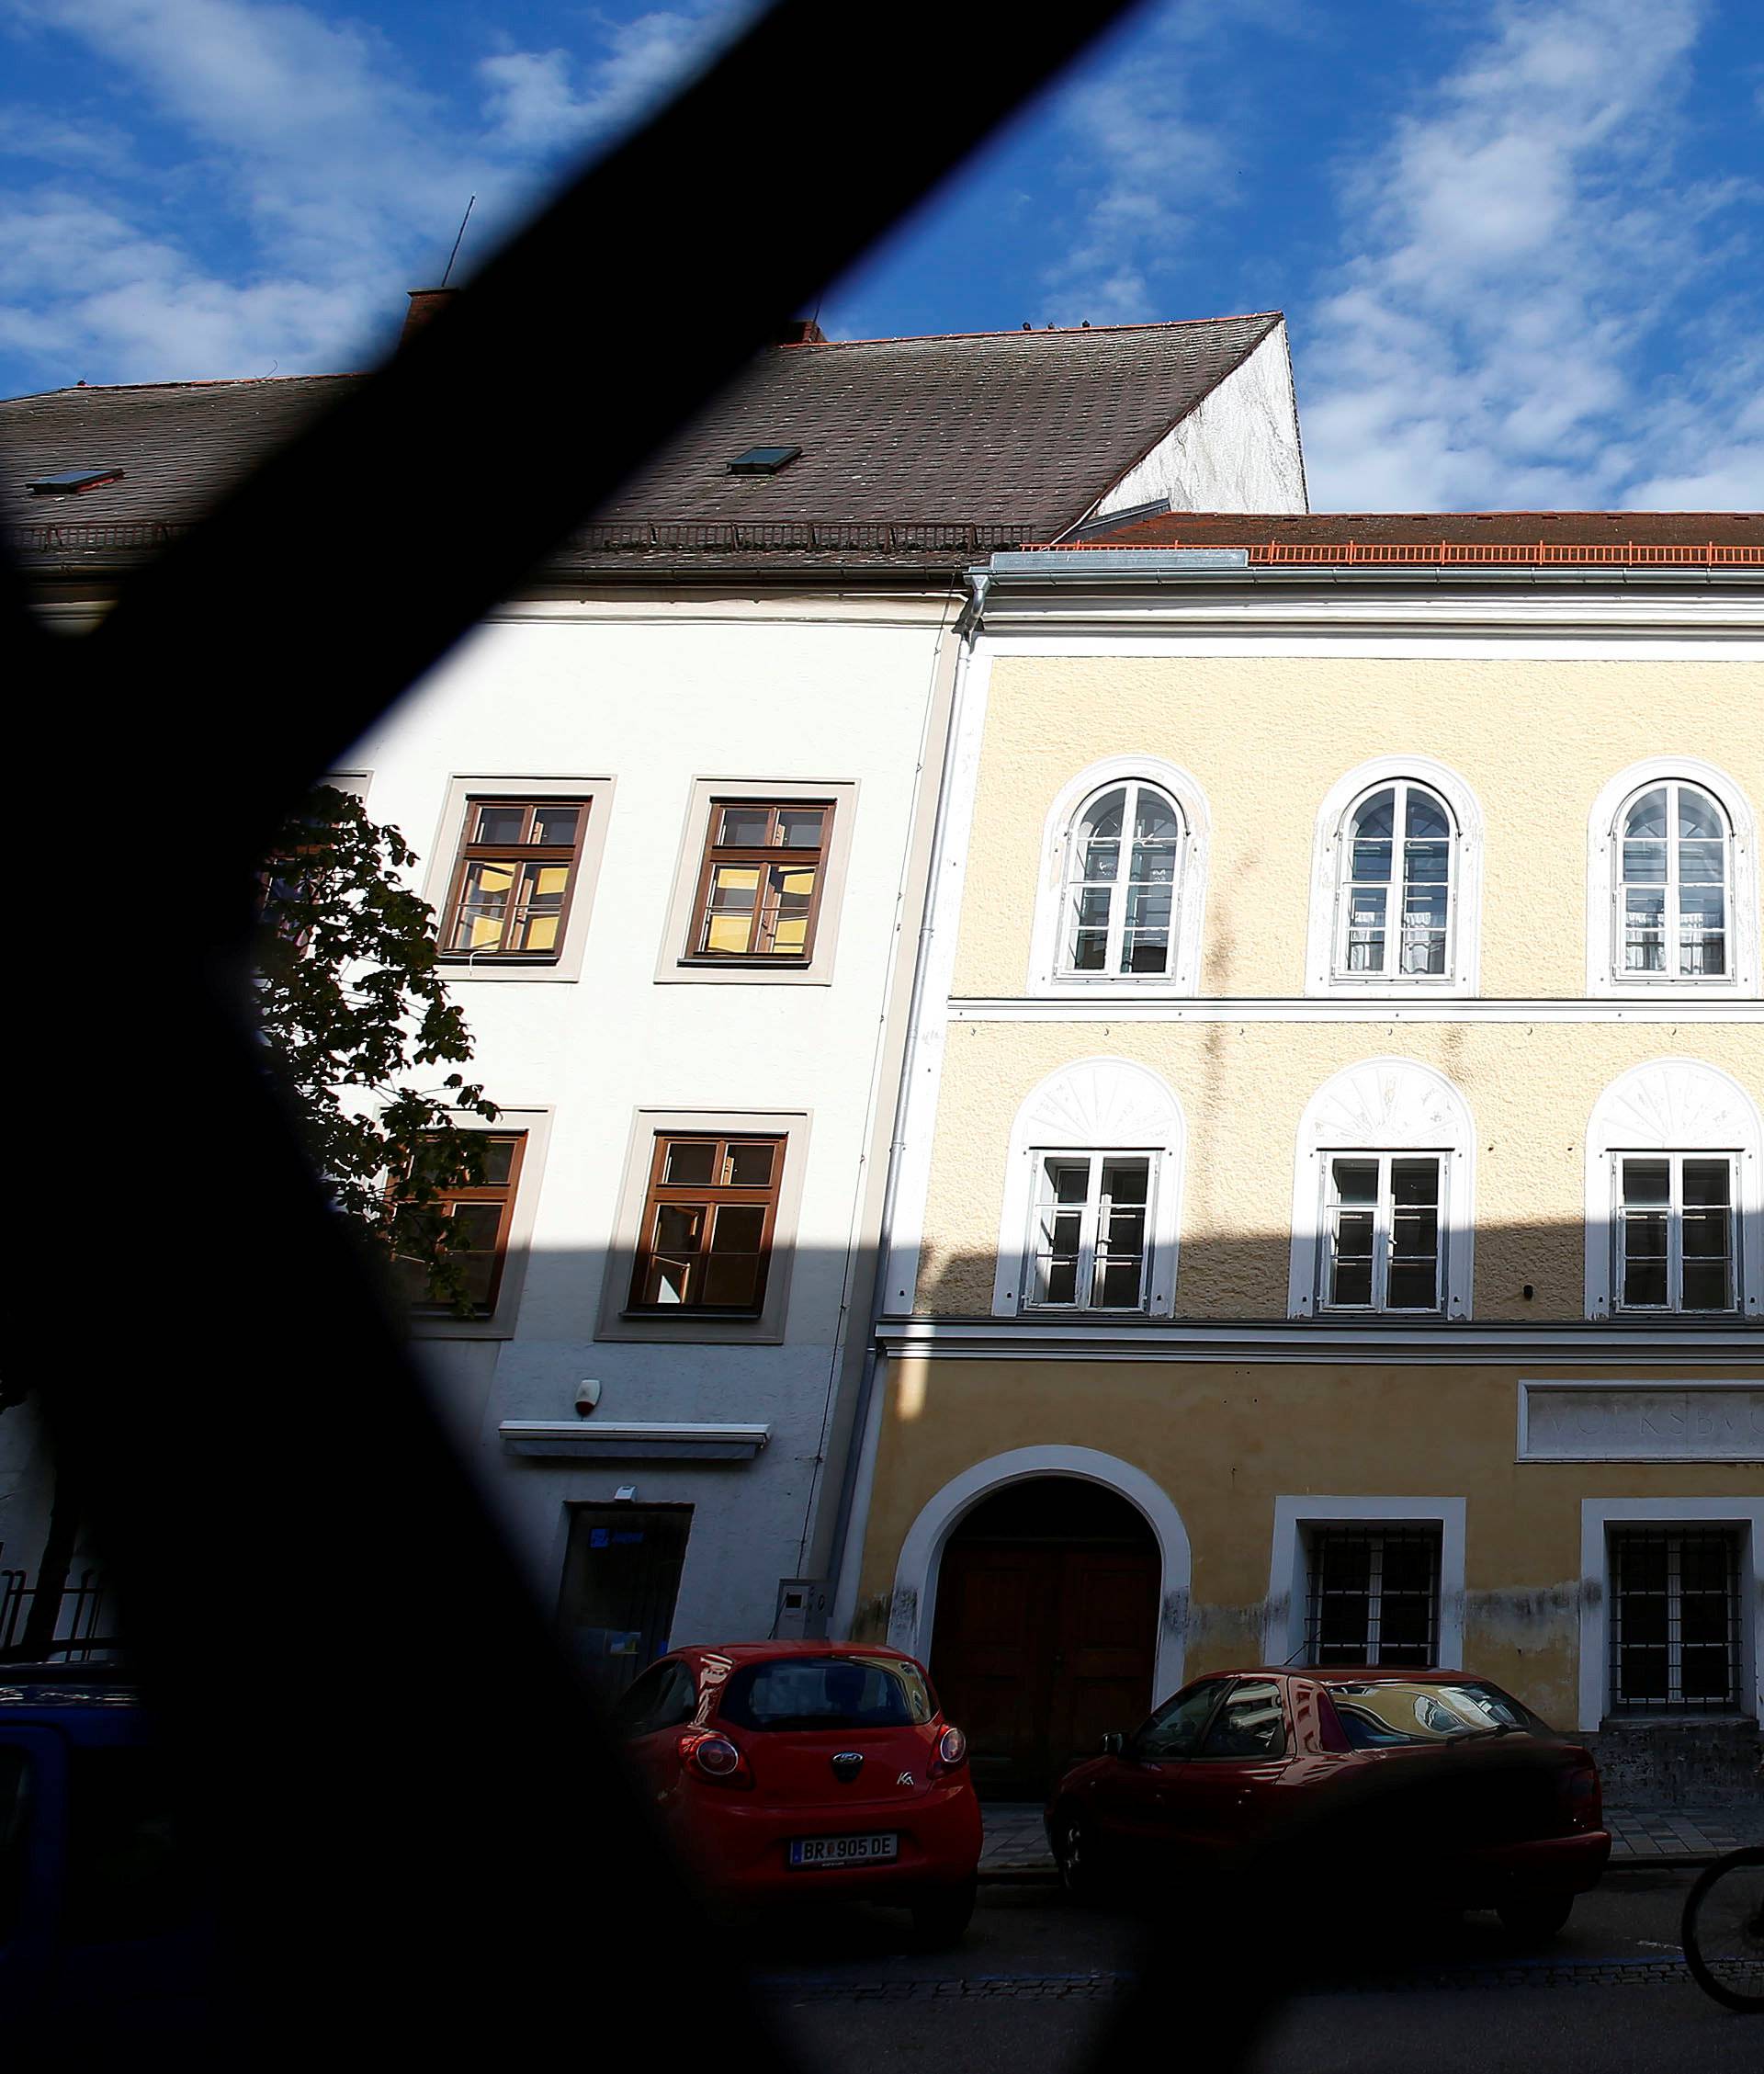 The house of in which Adolf Hitler was born is seen in northern Austrian city of Braunau am Inn